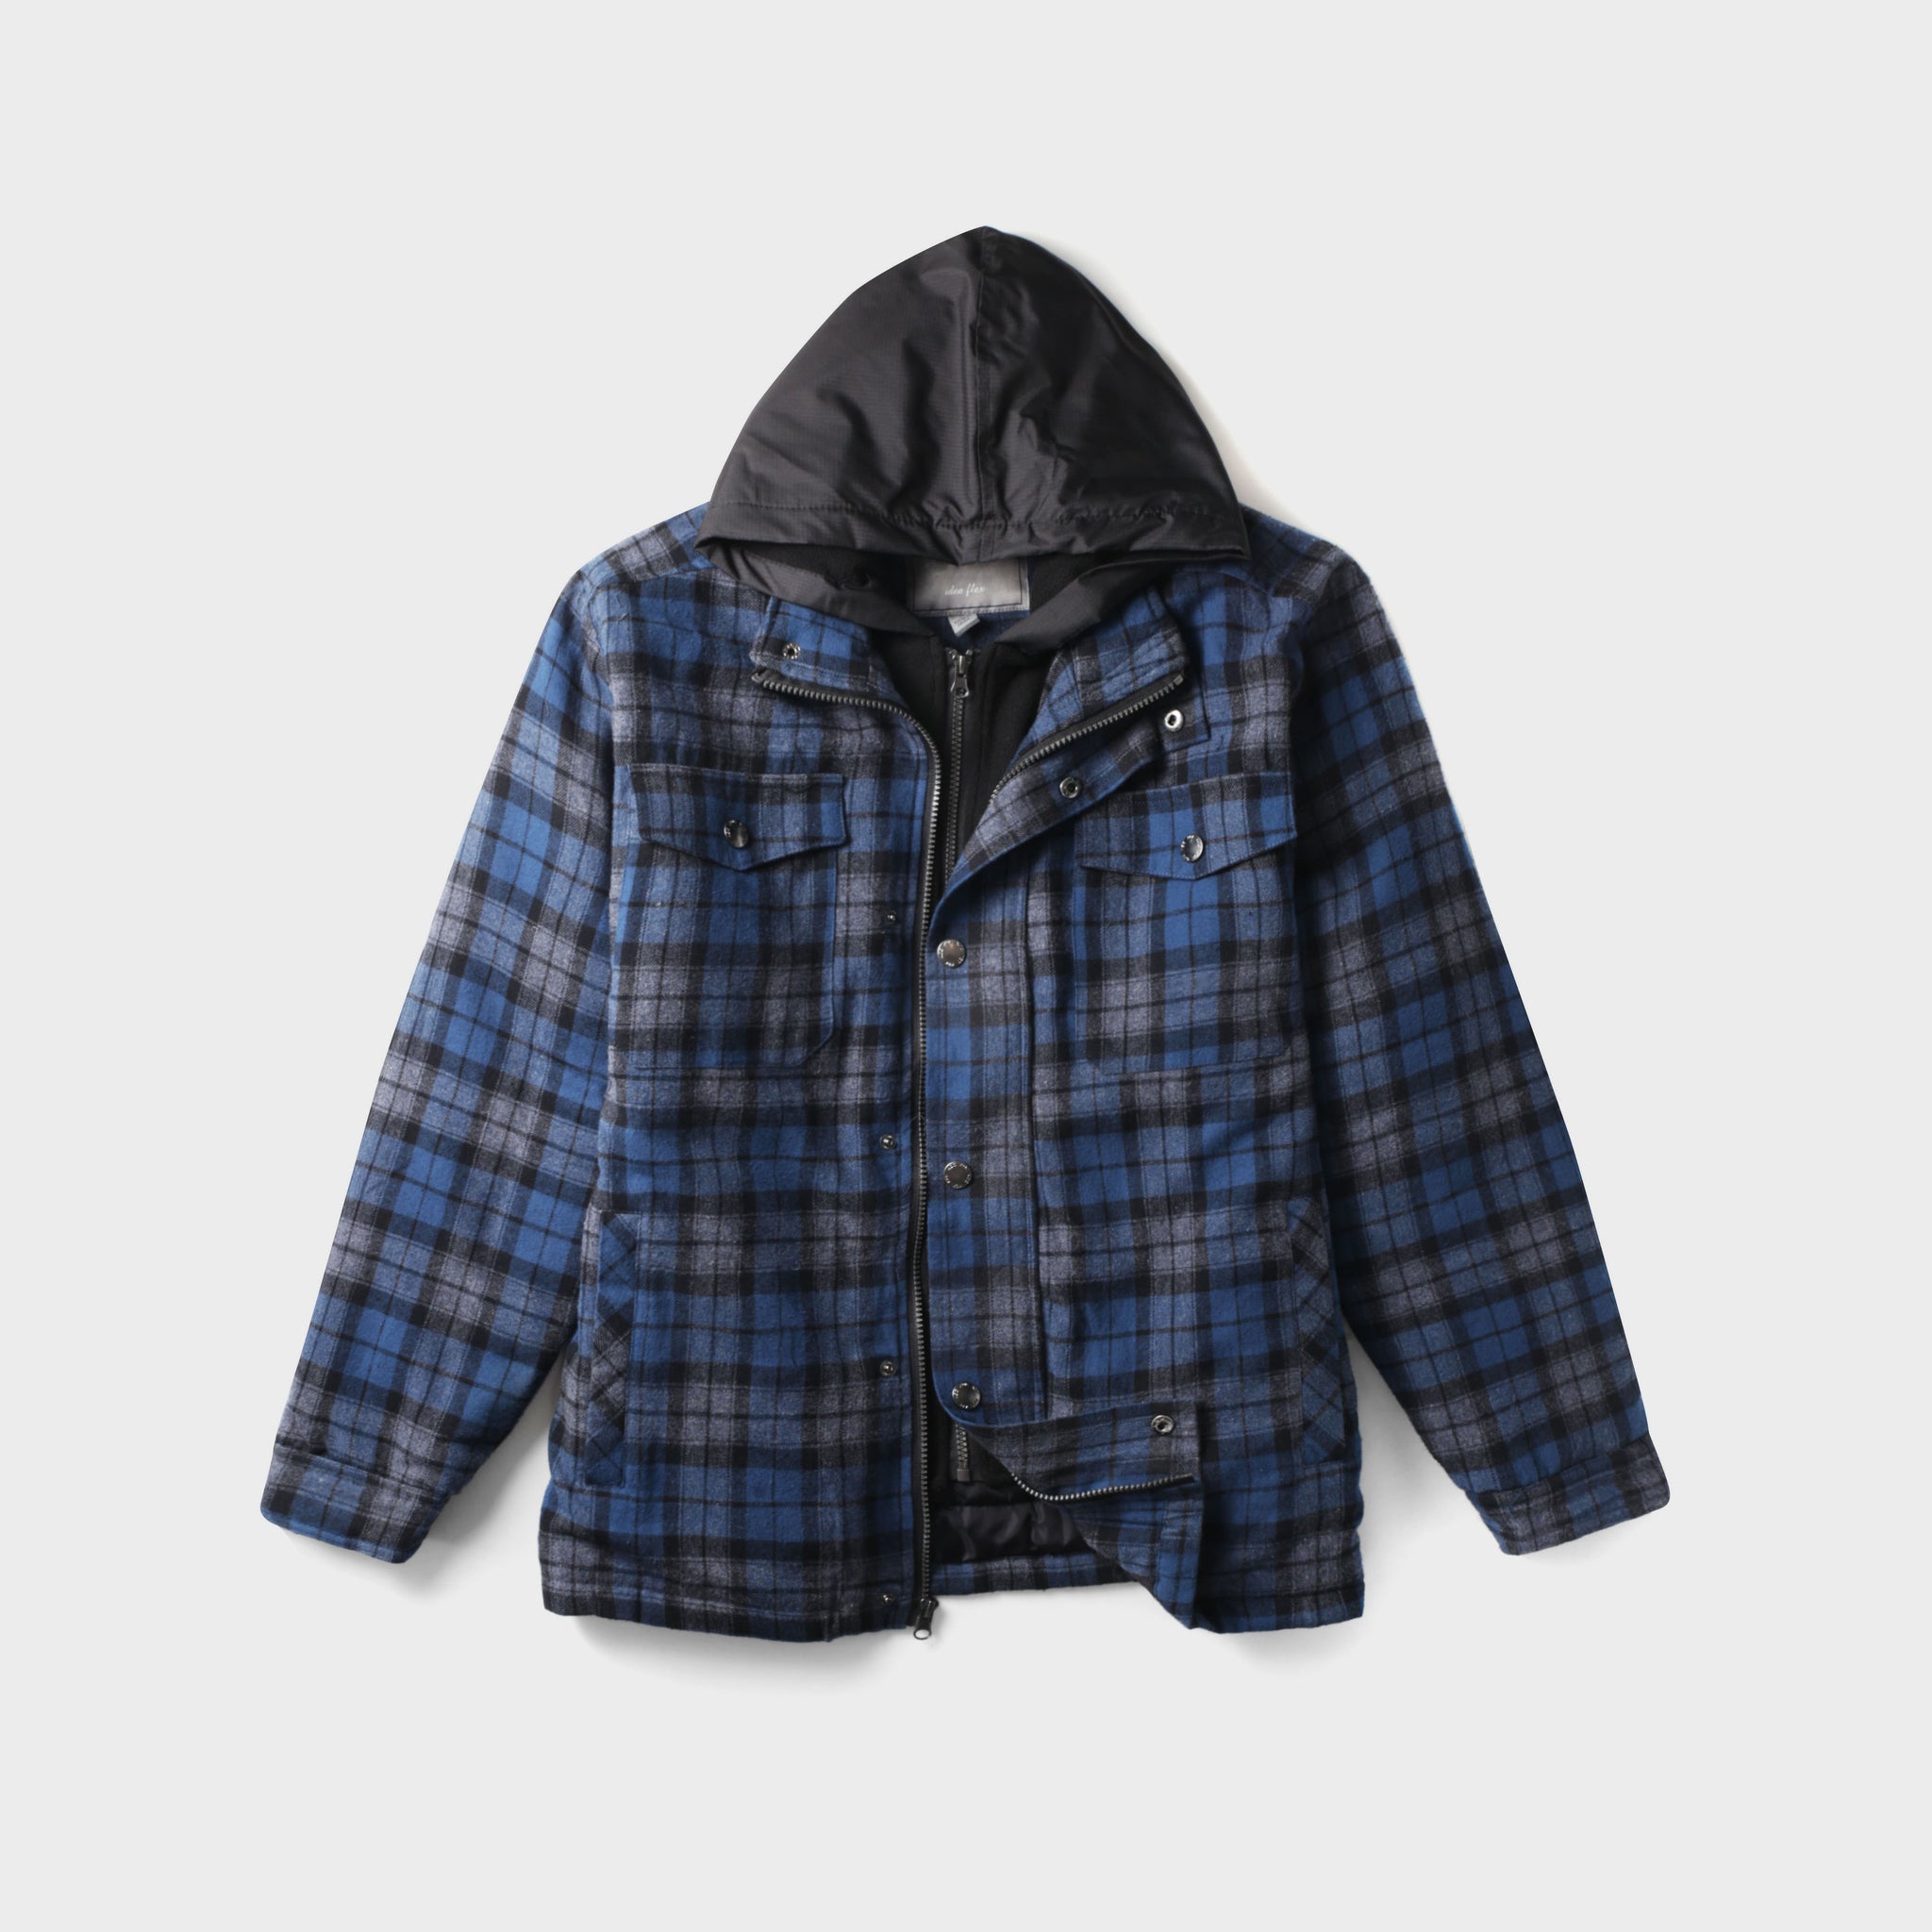 Men's Quilted Flannel Jacket with Hood - TK-1687GRY - Limited Stock